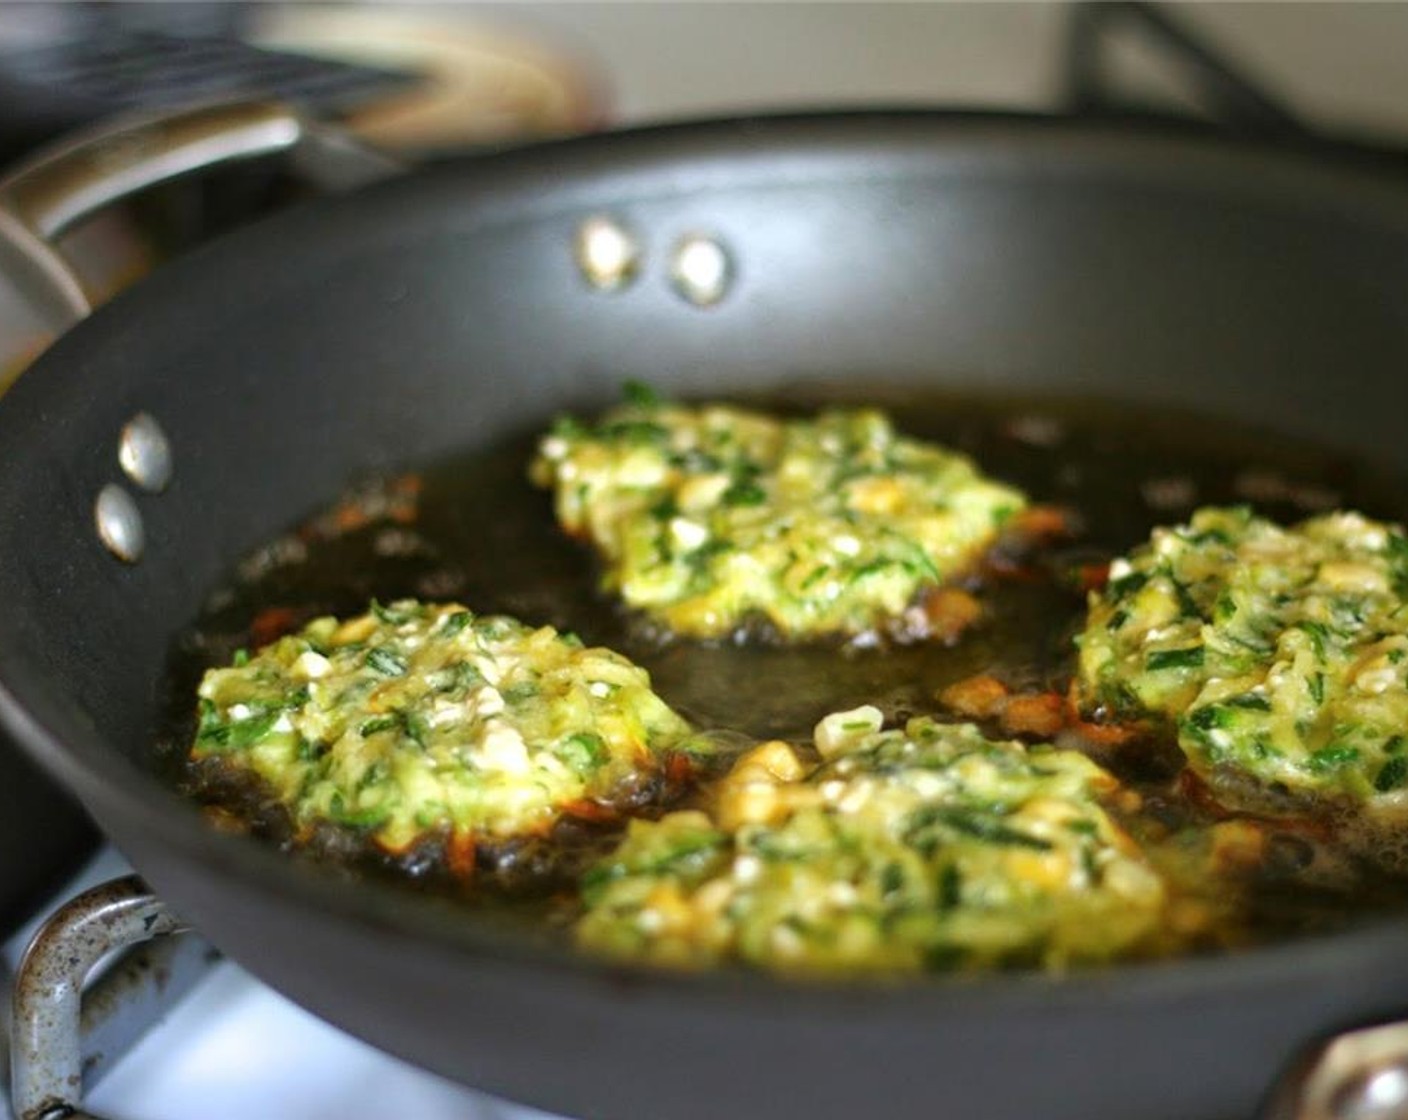 step 5 Place Extra-Virgin Olive Oil (as needed) in a pan and heat medium-high. Working in batches, take small scoops of the zucchini mixture, place mounds in hot oil, and lightly pat down with a spatula. Fry until golden brown on the outside.